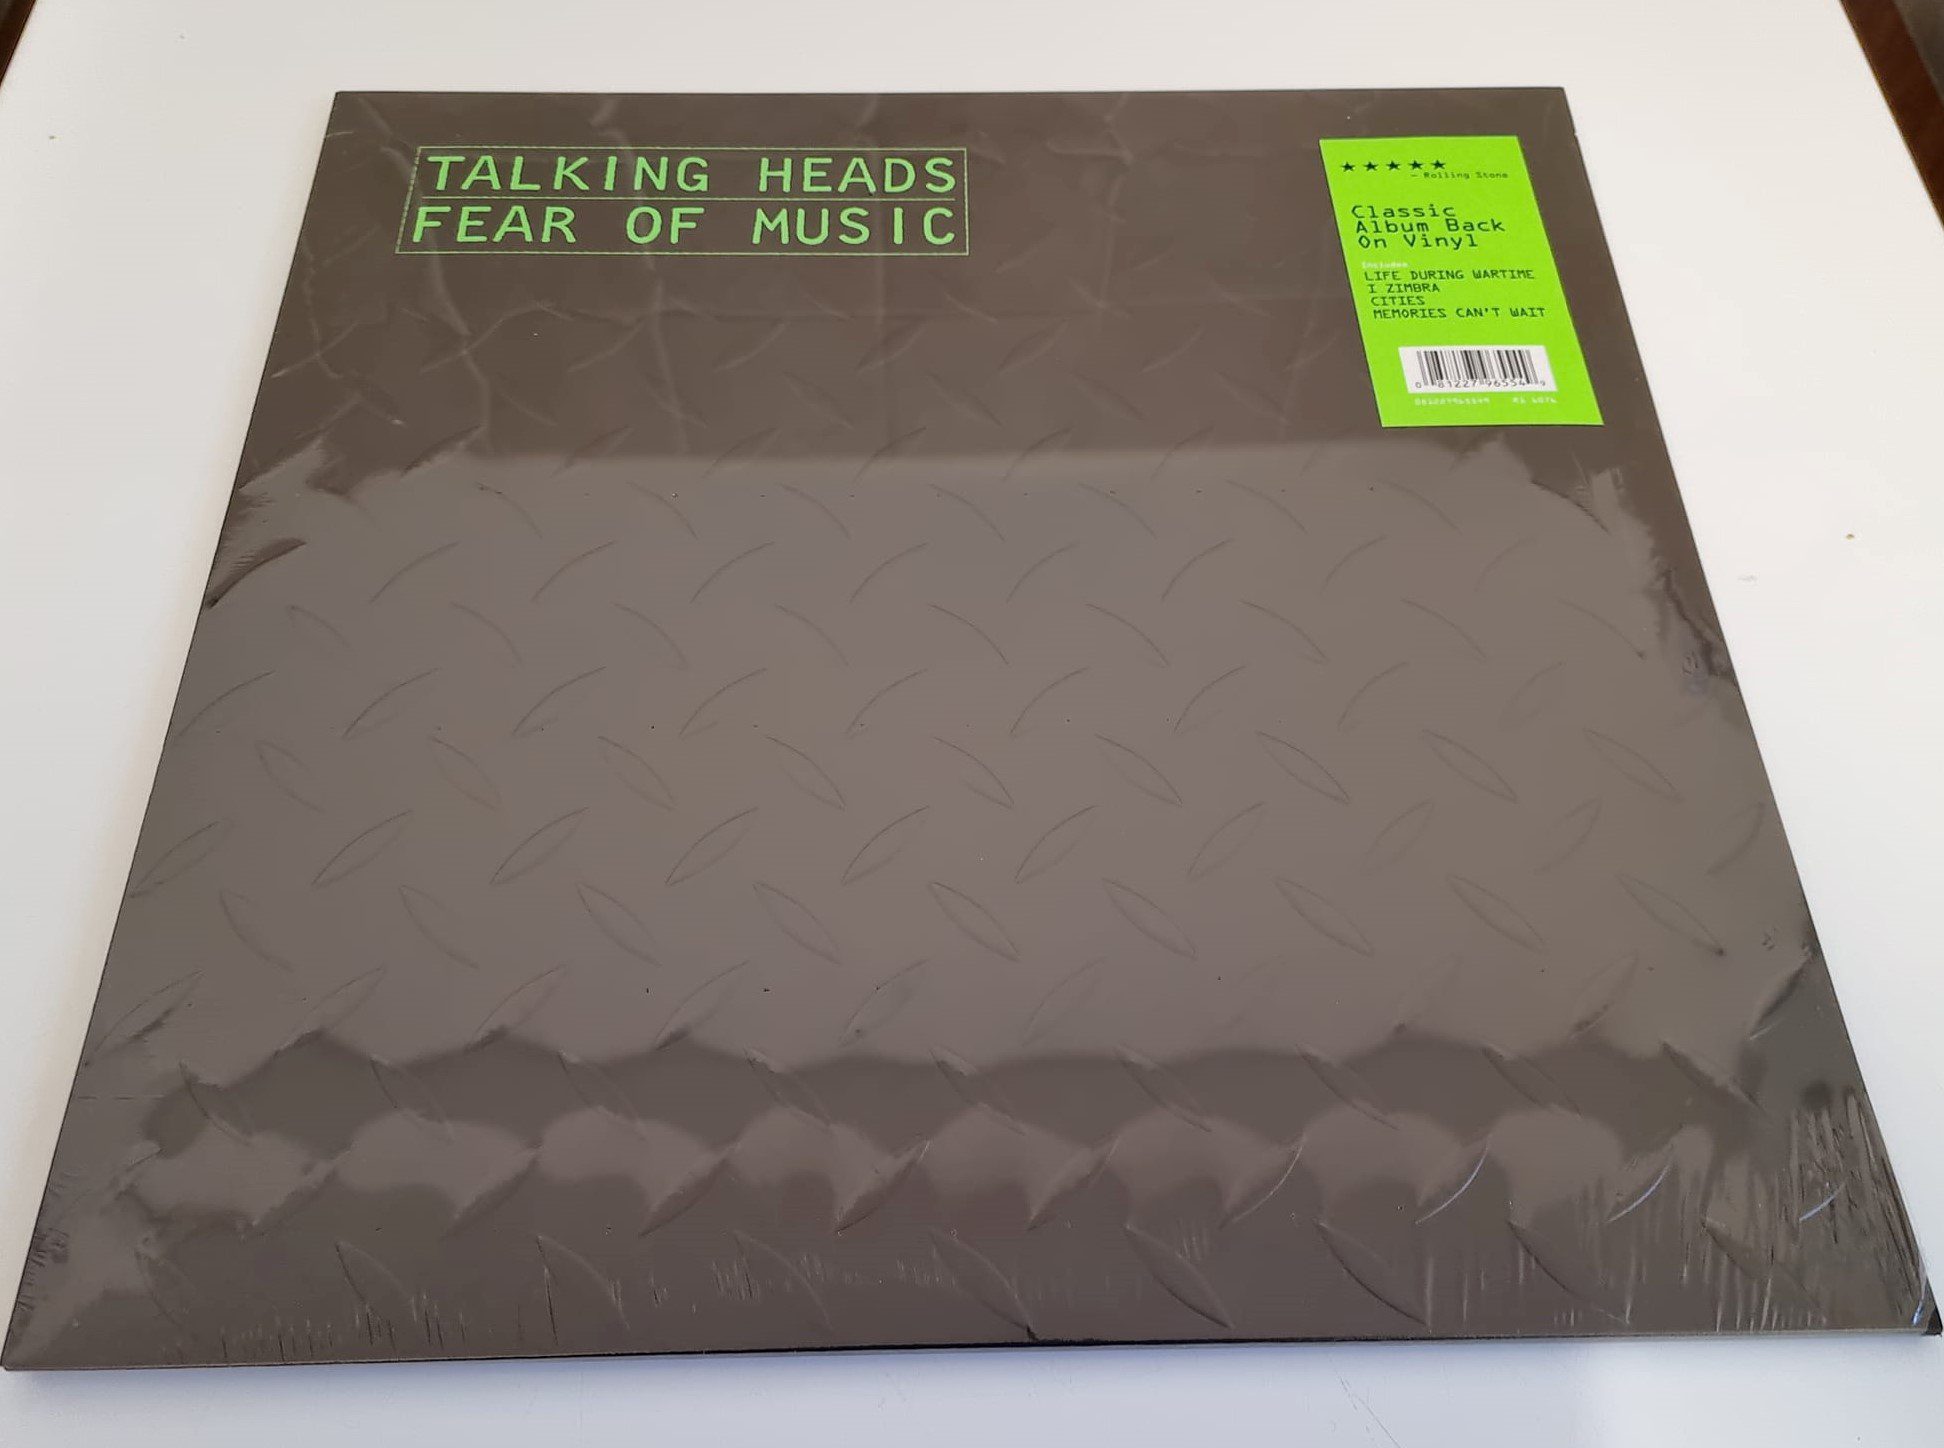 Buy this rare Talking Heads record by clicking here